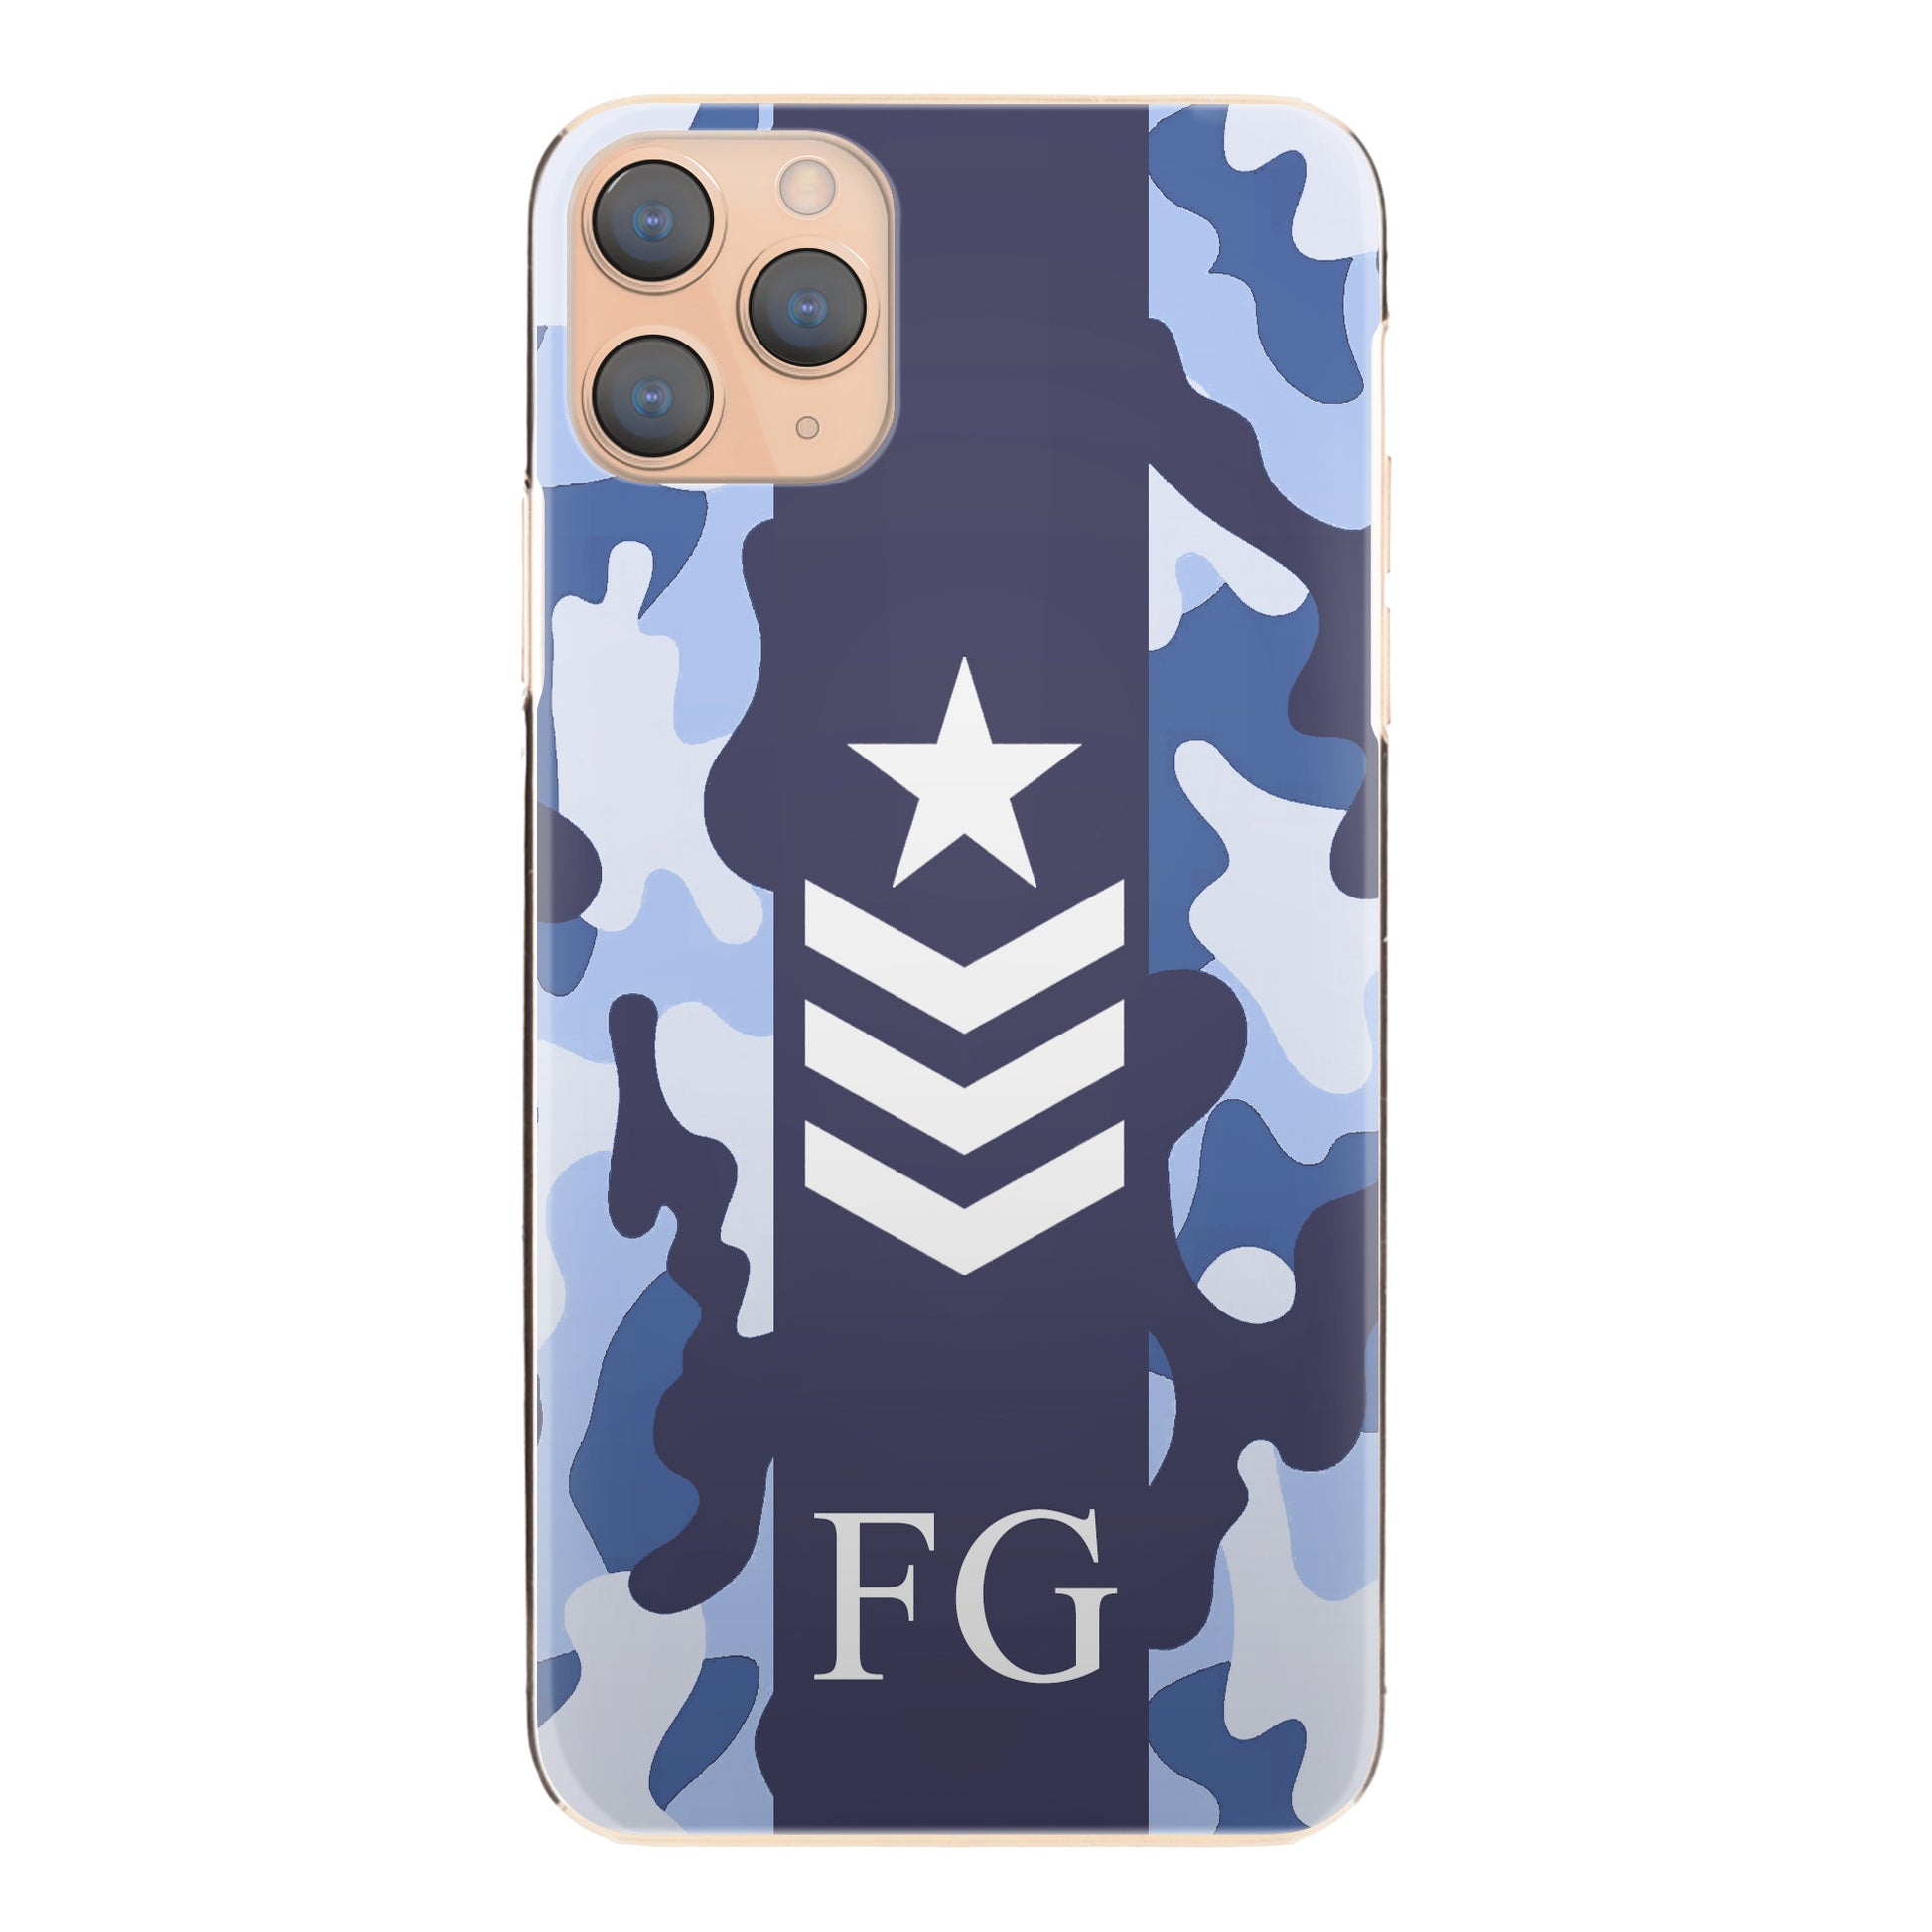 Personalised Google Phone Hard Case with Initials and Army Rank on Blue Camo